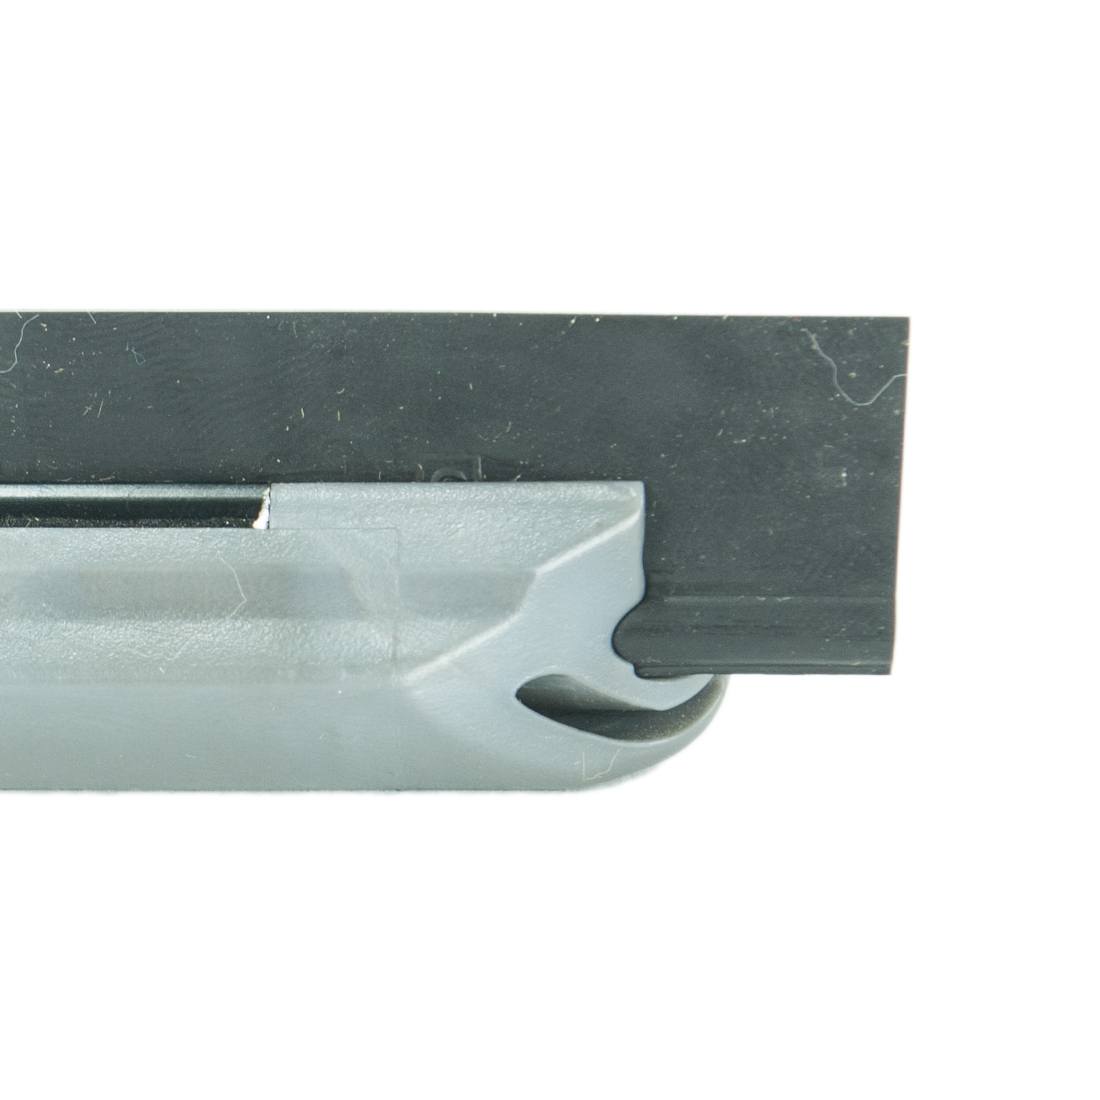 Unger Ninja Aluminum Squeegee Channel Close Up View